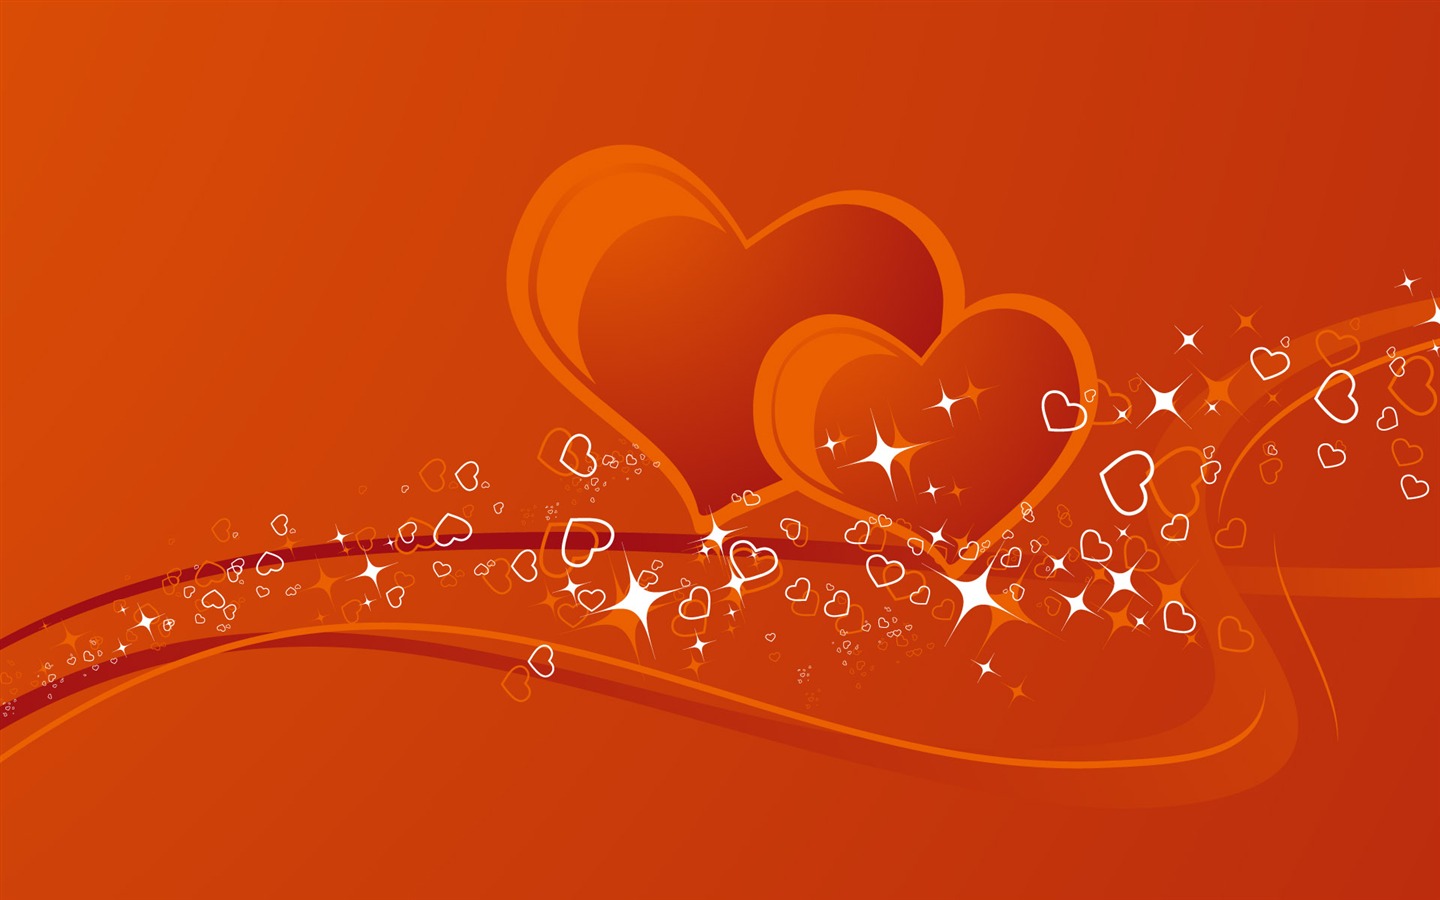 Valentine's Day Love Theme Wallpapers #25 - 1440x900